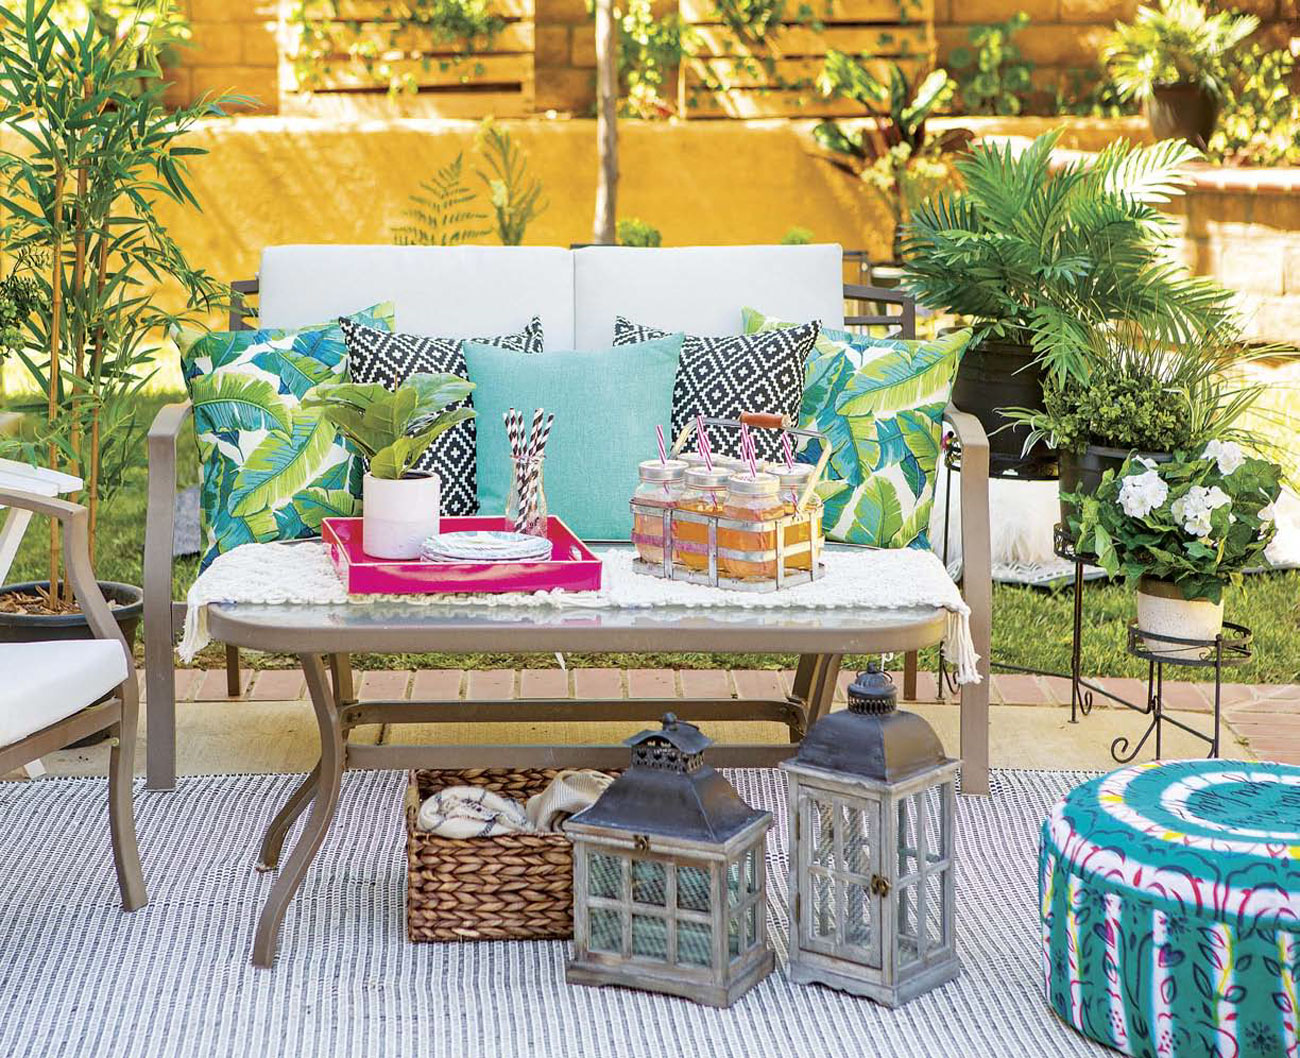 Outdoor seating area with turquoise accents and drink station as well as rustic lanterns.